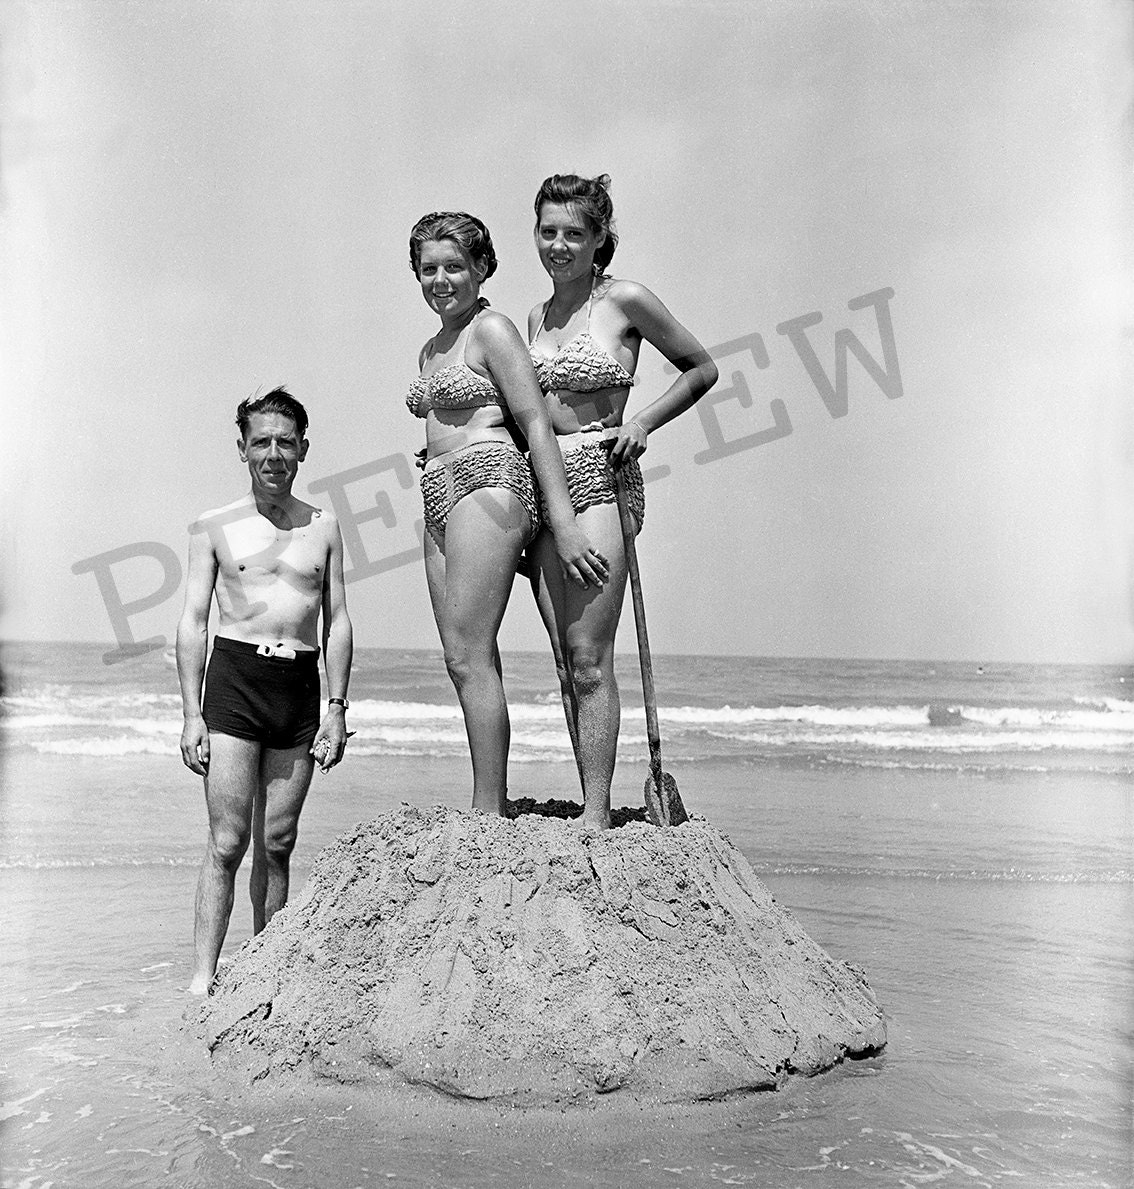 Girls on a Sand Volcano 40s Vintage Photo Instant Download image